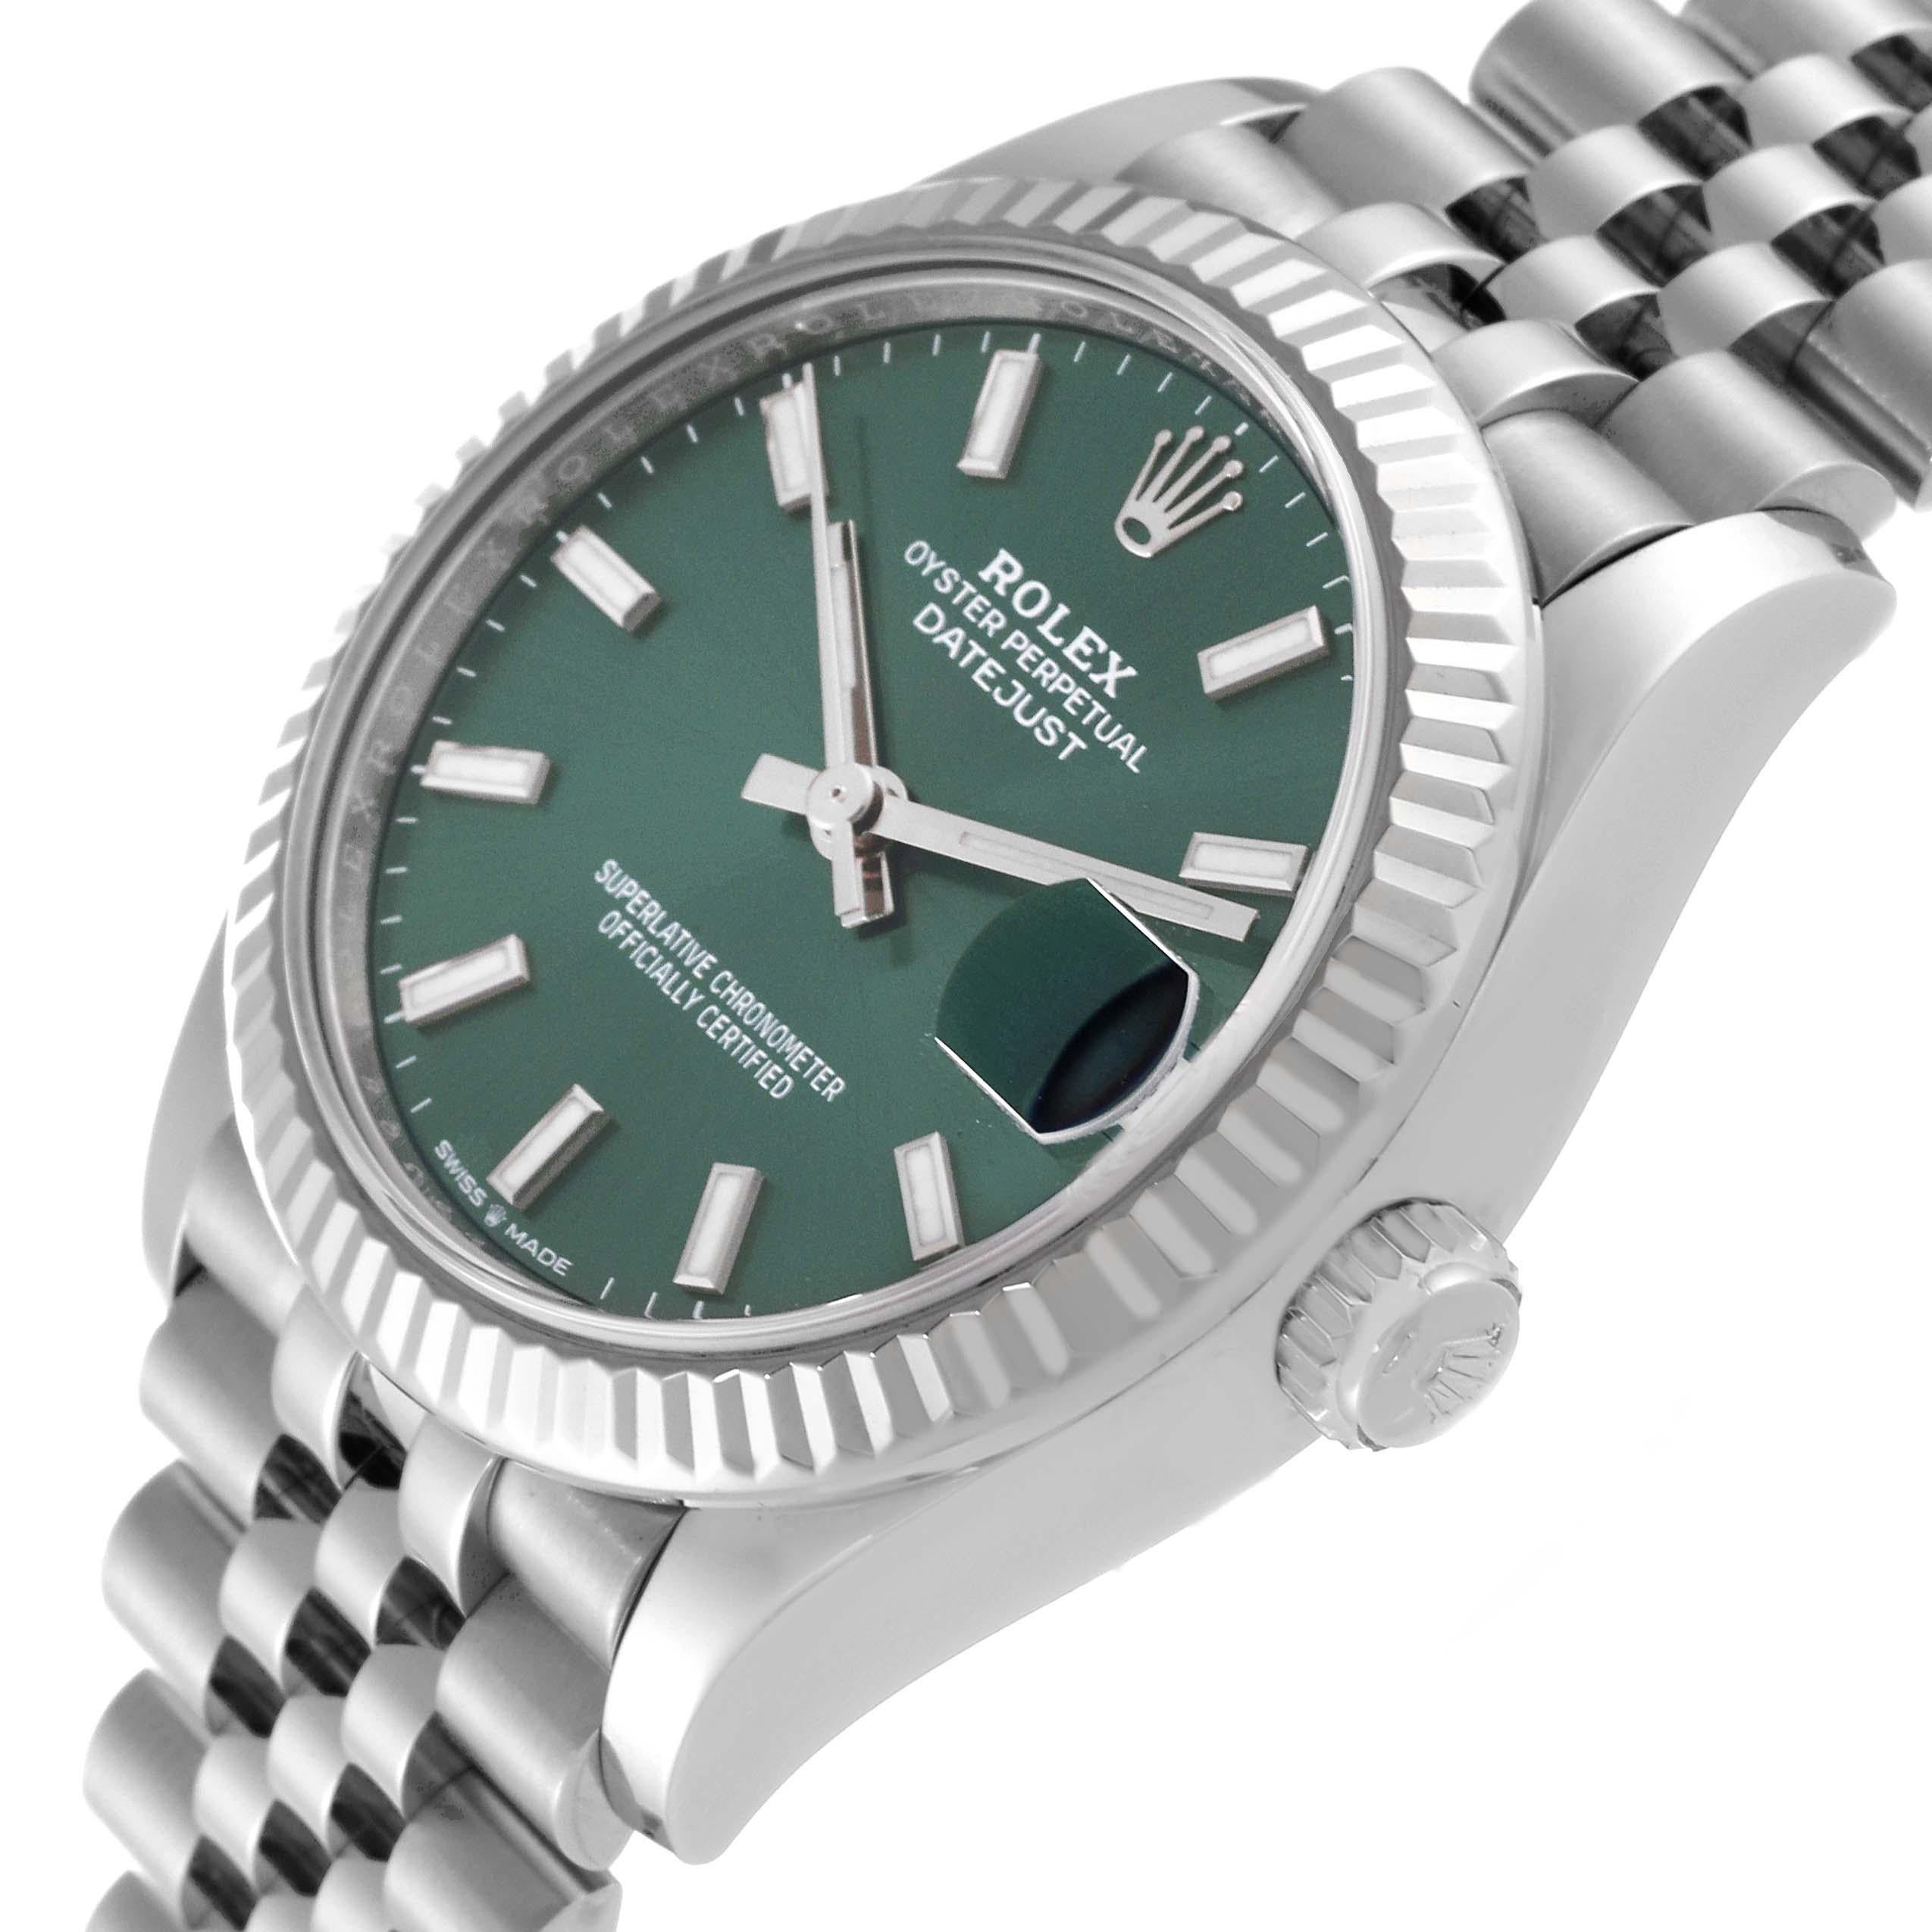 Rolex Datejust Midsize Steel White Gold Mint Green Dial Ladies Watch 278274 Box Card. Officially certified chronometer automatic self-winding movement. Stainless steel oyster case 31.0 mm in diameter. Rolex logo on a crown. 18k white gold fluted